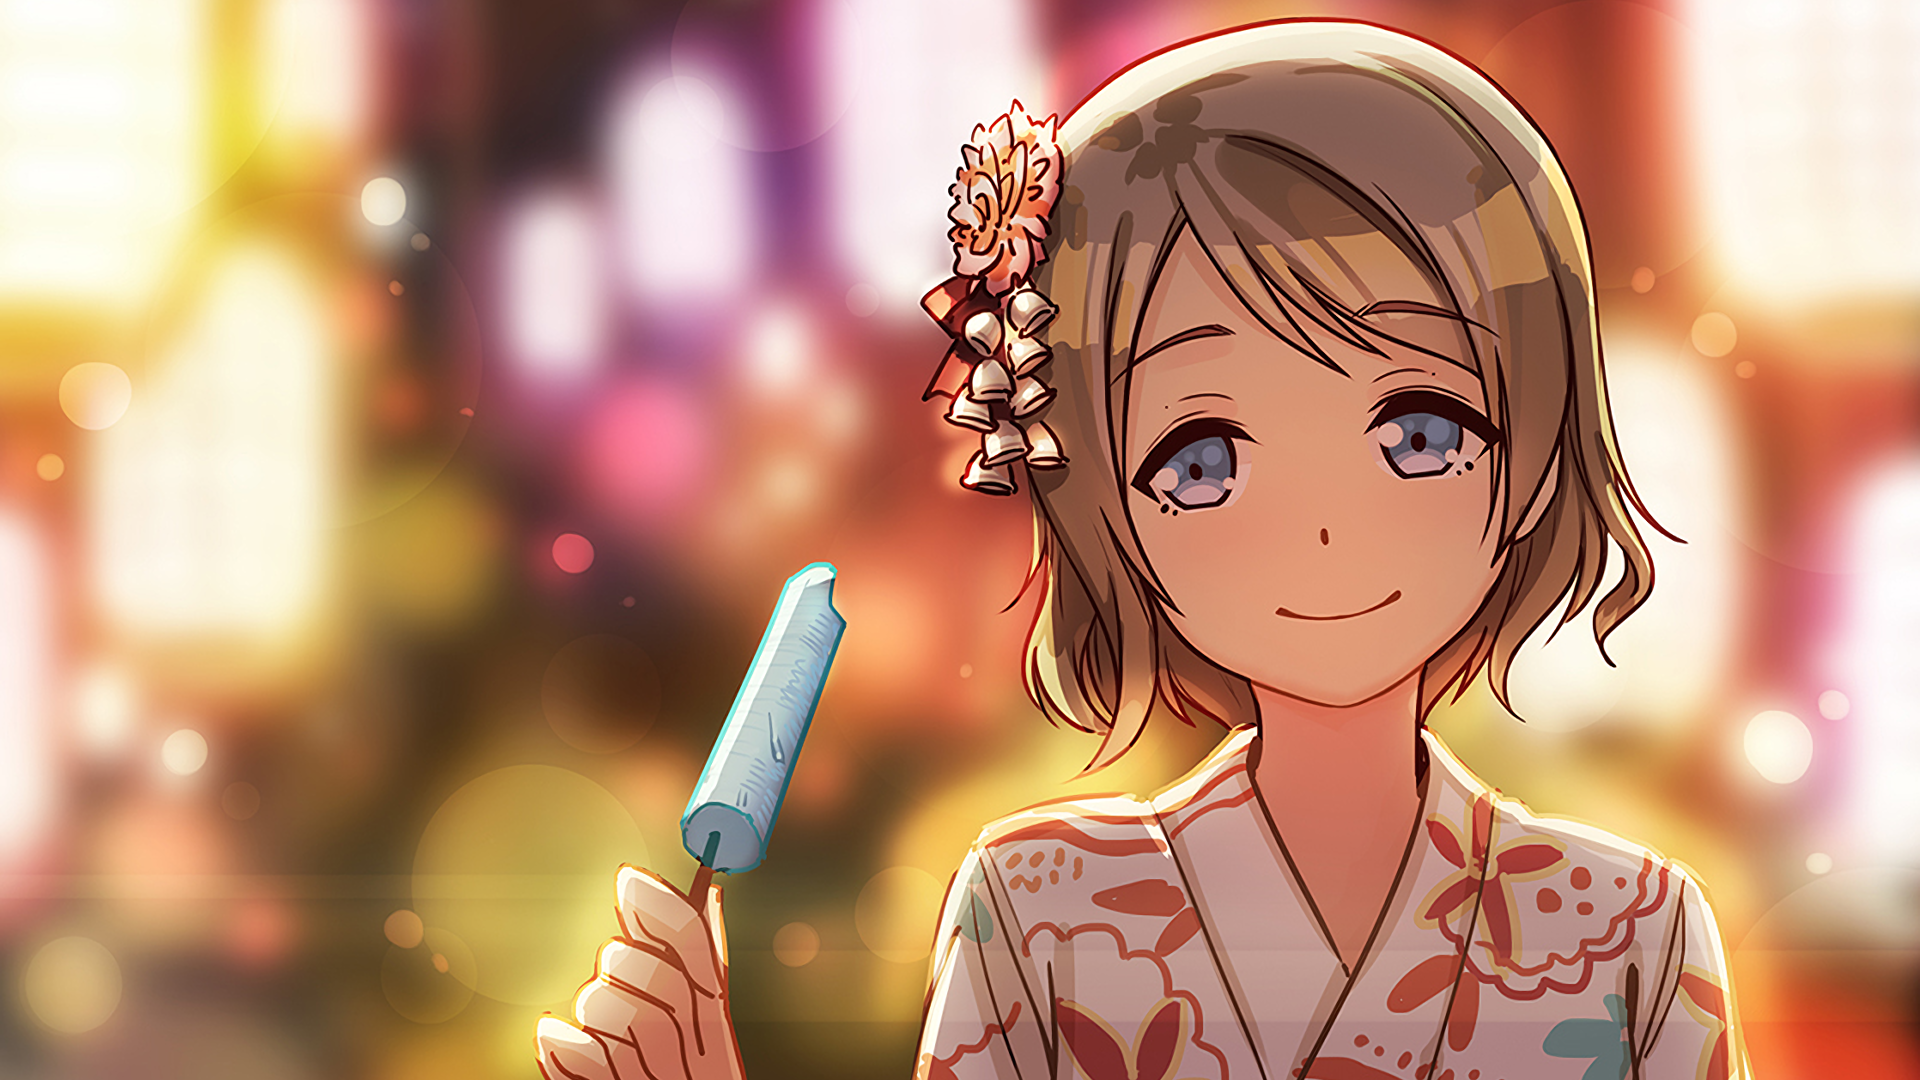 Desktop Wallpaper Watanabe You, Anime Girl, Cute Anime, Eating Candy, HD Image, Picture, Background, Gkn0du